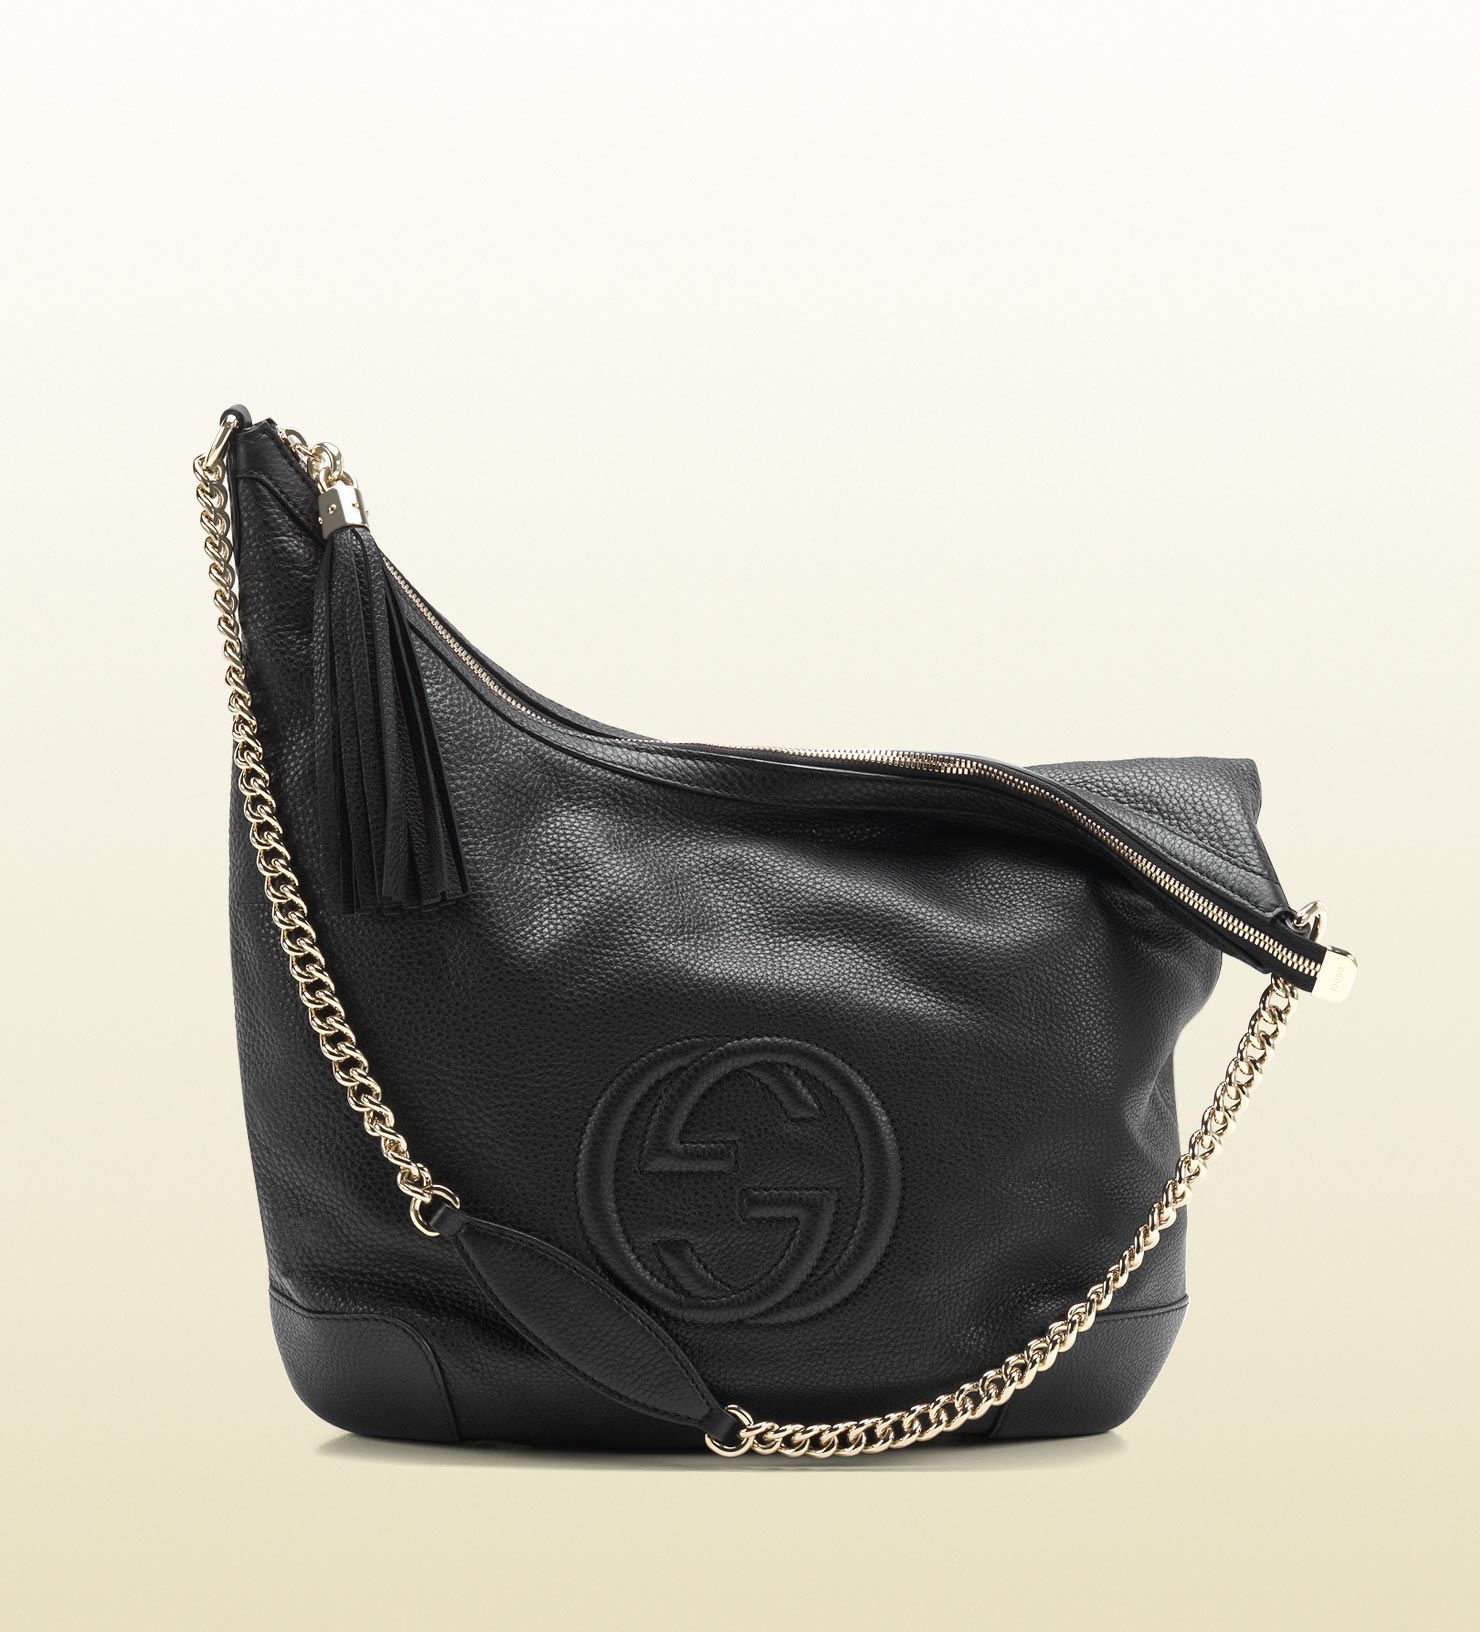 Gucci Soho Black Leather Shoulder Bag with Chain Strap in Black | Lyst